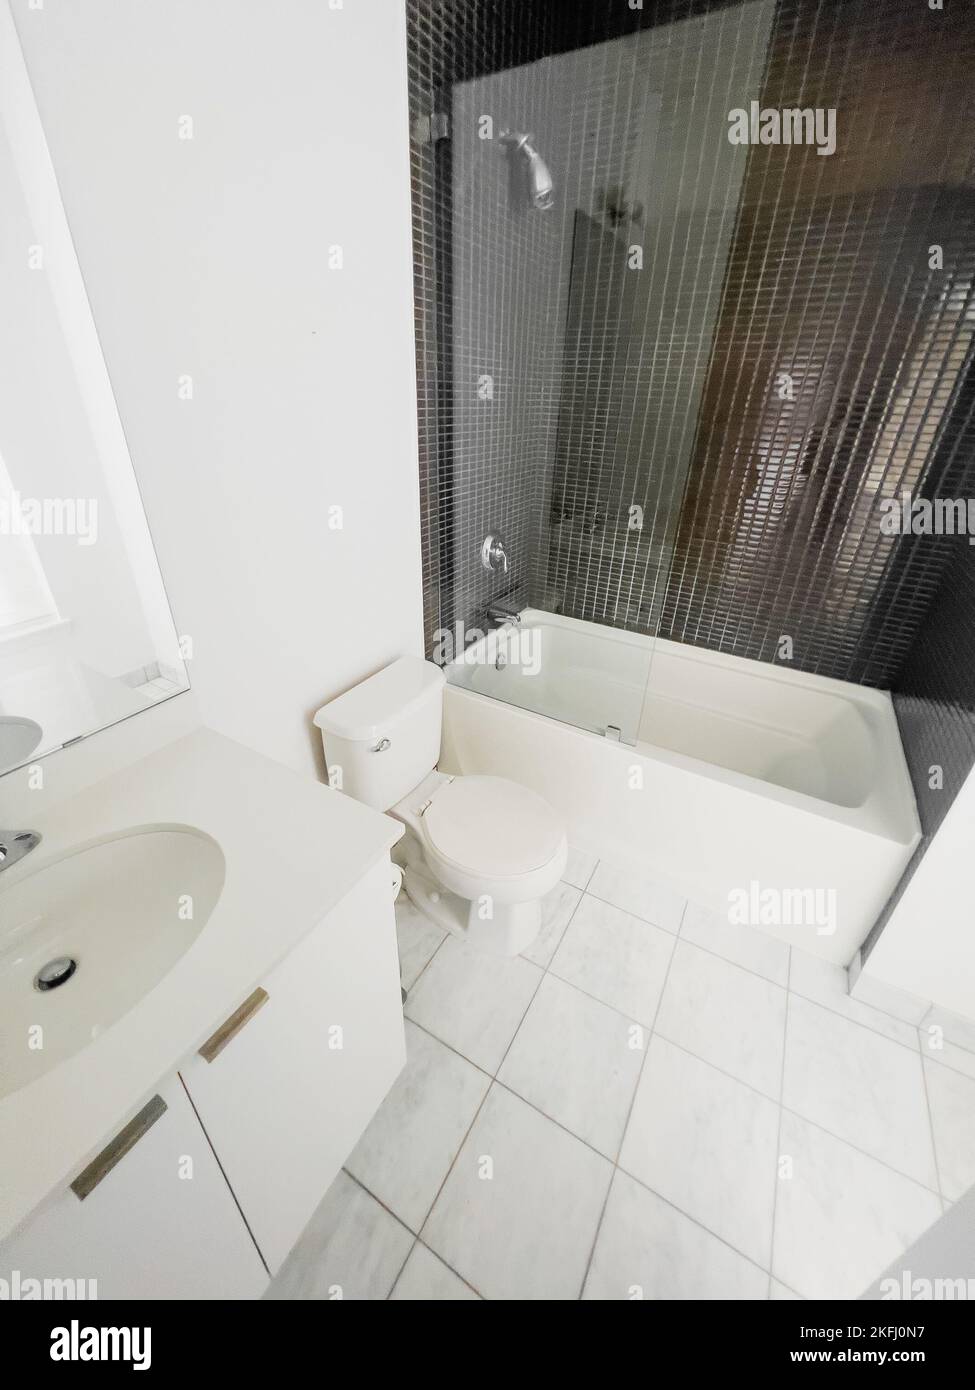 White bathtub by toilet seat and sink against mosaic wall in clean modern bathroom. Stock Photo